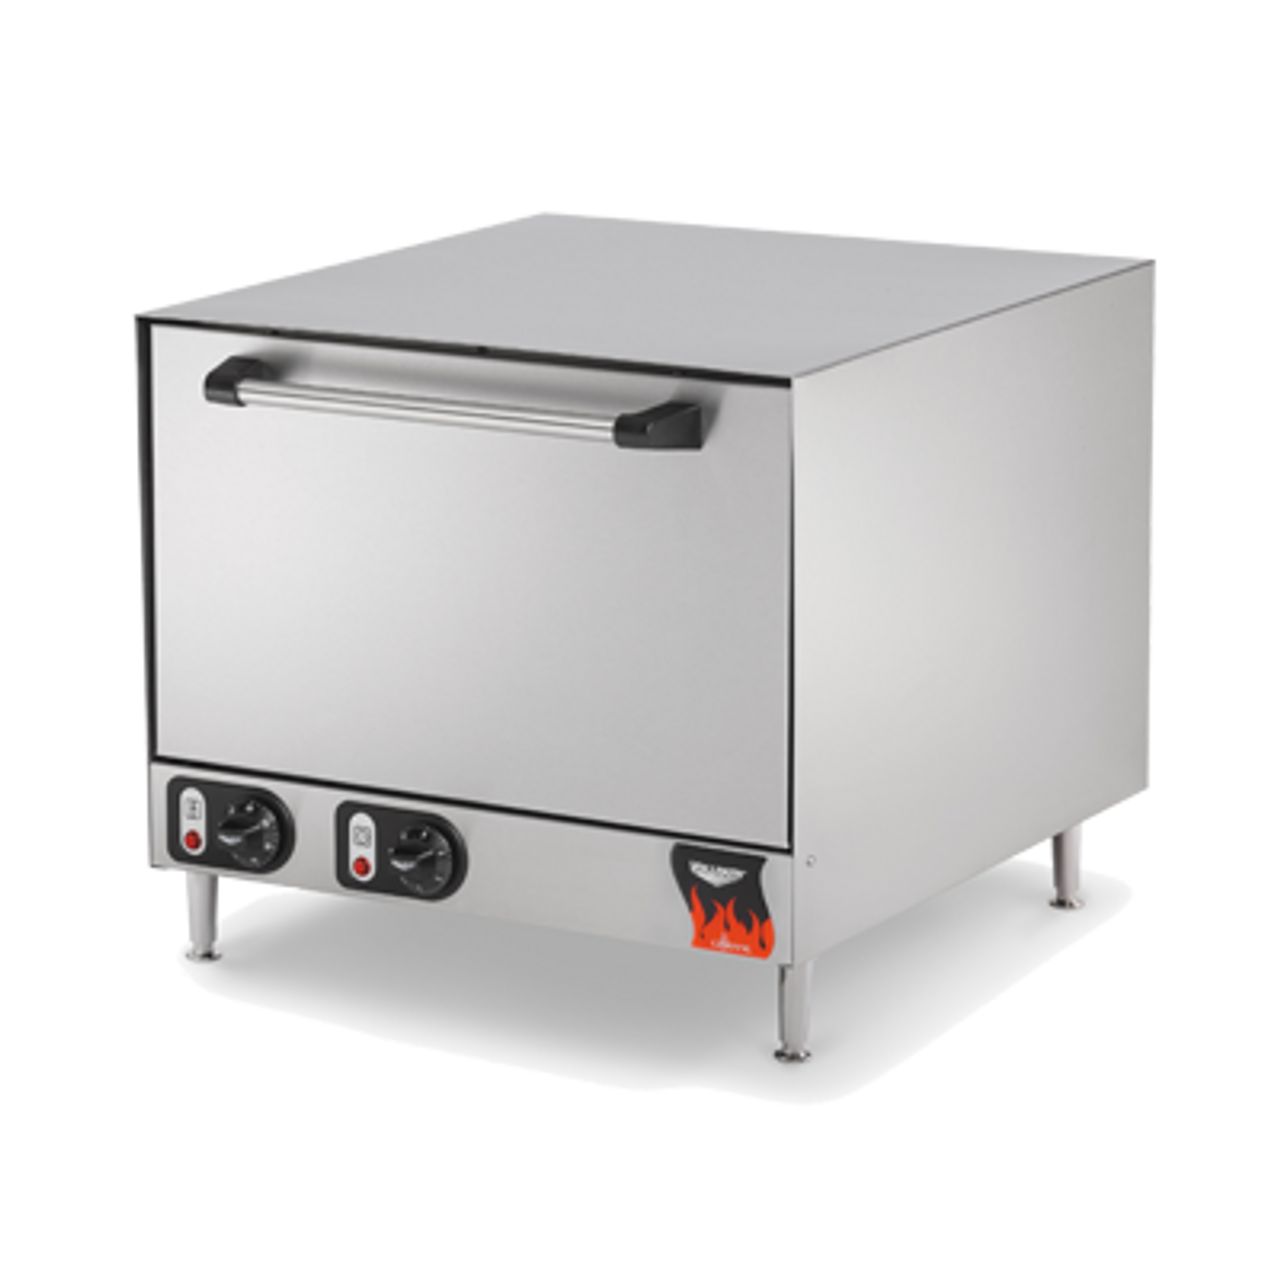 Pizza/Bake Oven, electric, stainless steel exterior & interior, supplied with (2) ceramic bake decks, 15-minute timer function, shelf size 17-1/2", 2-7/8" between shelves, heat setting 140°F-750°F, 208-240v/60/1-ph, 10.1-11.6 amps, 2100-2800W, NEMA 6-15P, OA dimension 25-3/4"W x 23-1/8"D x 21-3/4"H, cooking chamber size 19-3/16"W x 18-1/2"D x 9-7/16"H, model# POA8002, NSF, cUL, imported